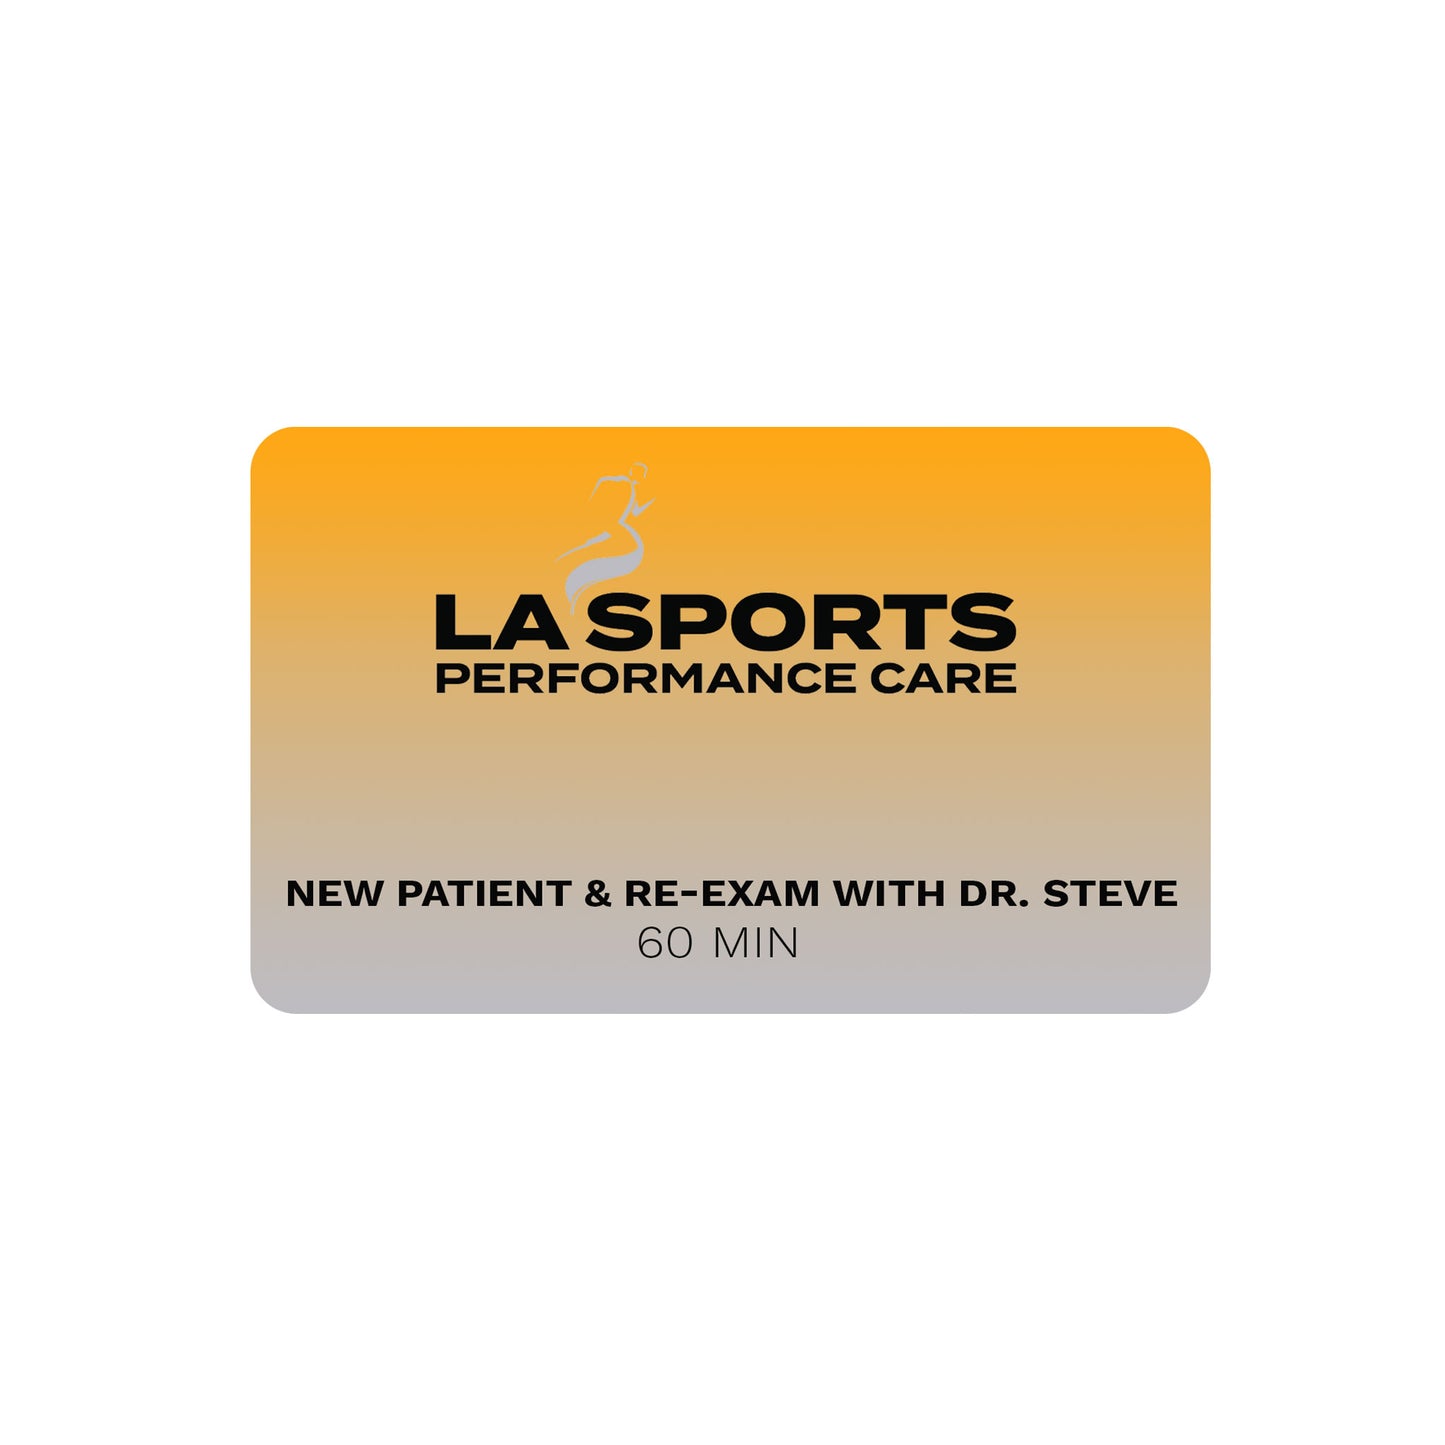 NEW PATIENT & RE-EXAM WITH DR. STEVE   60 MIN